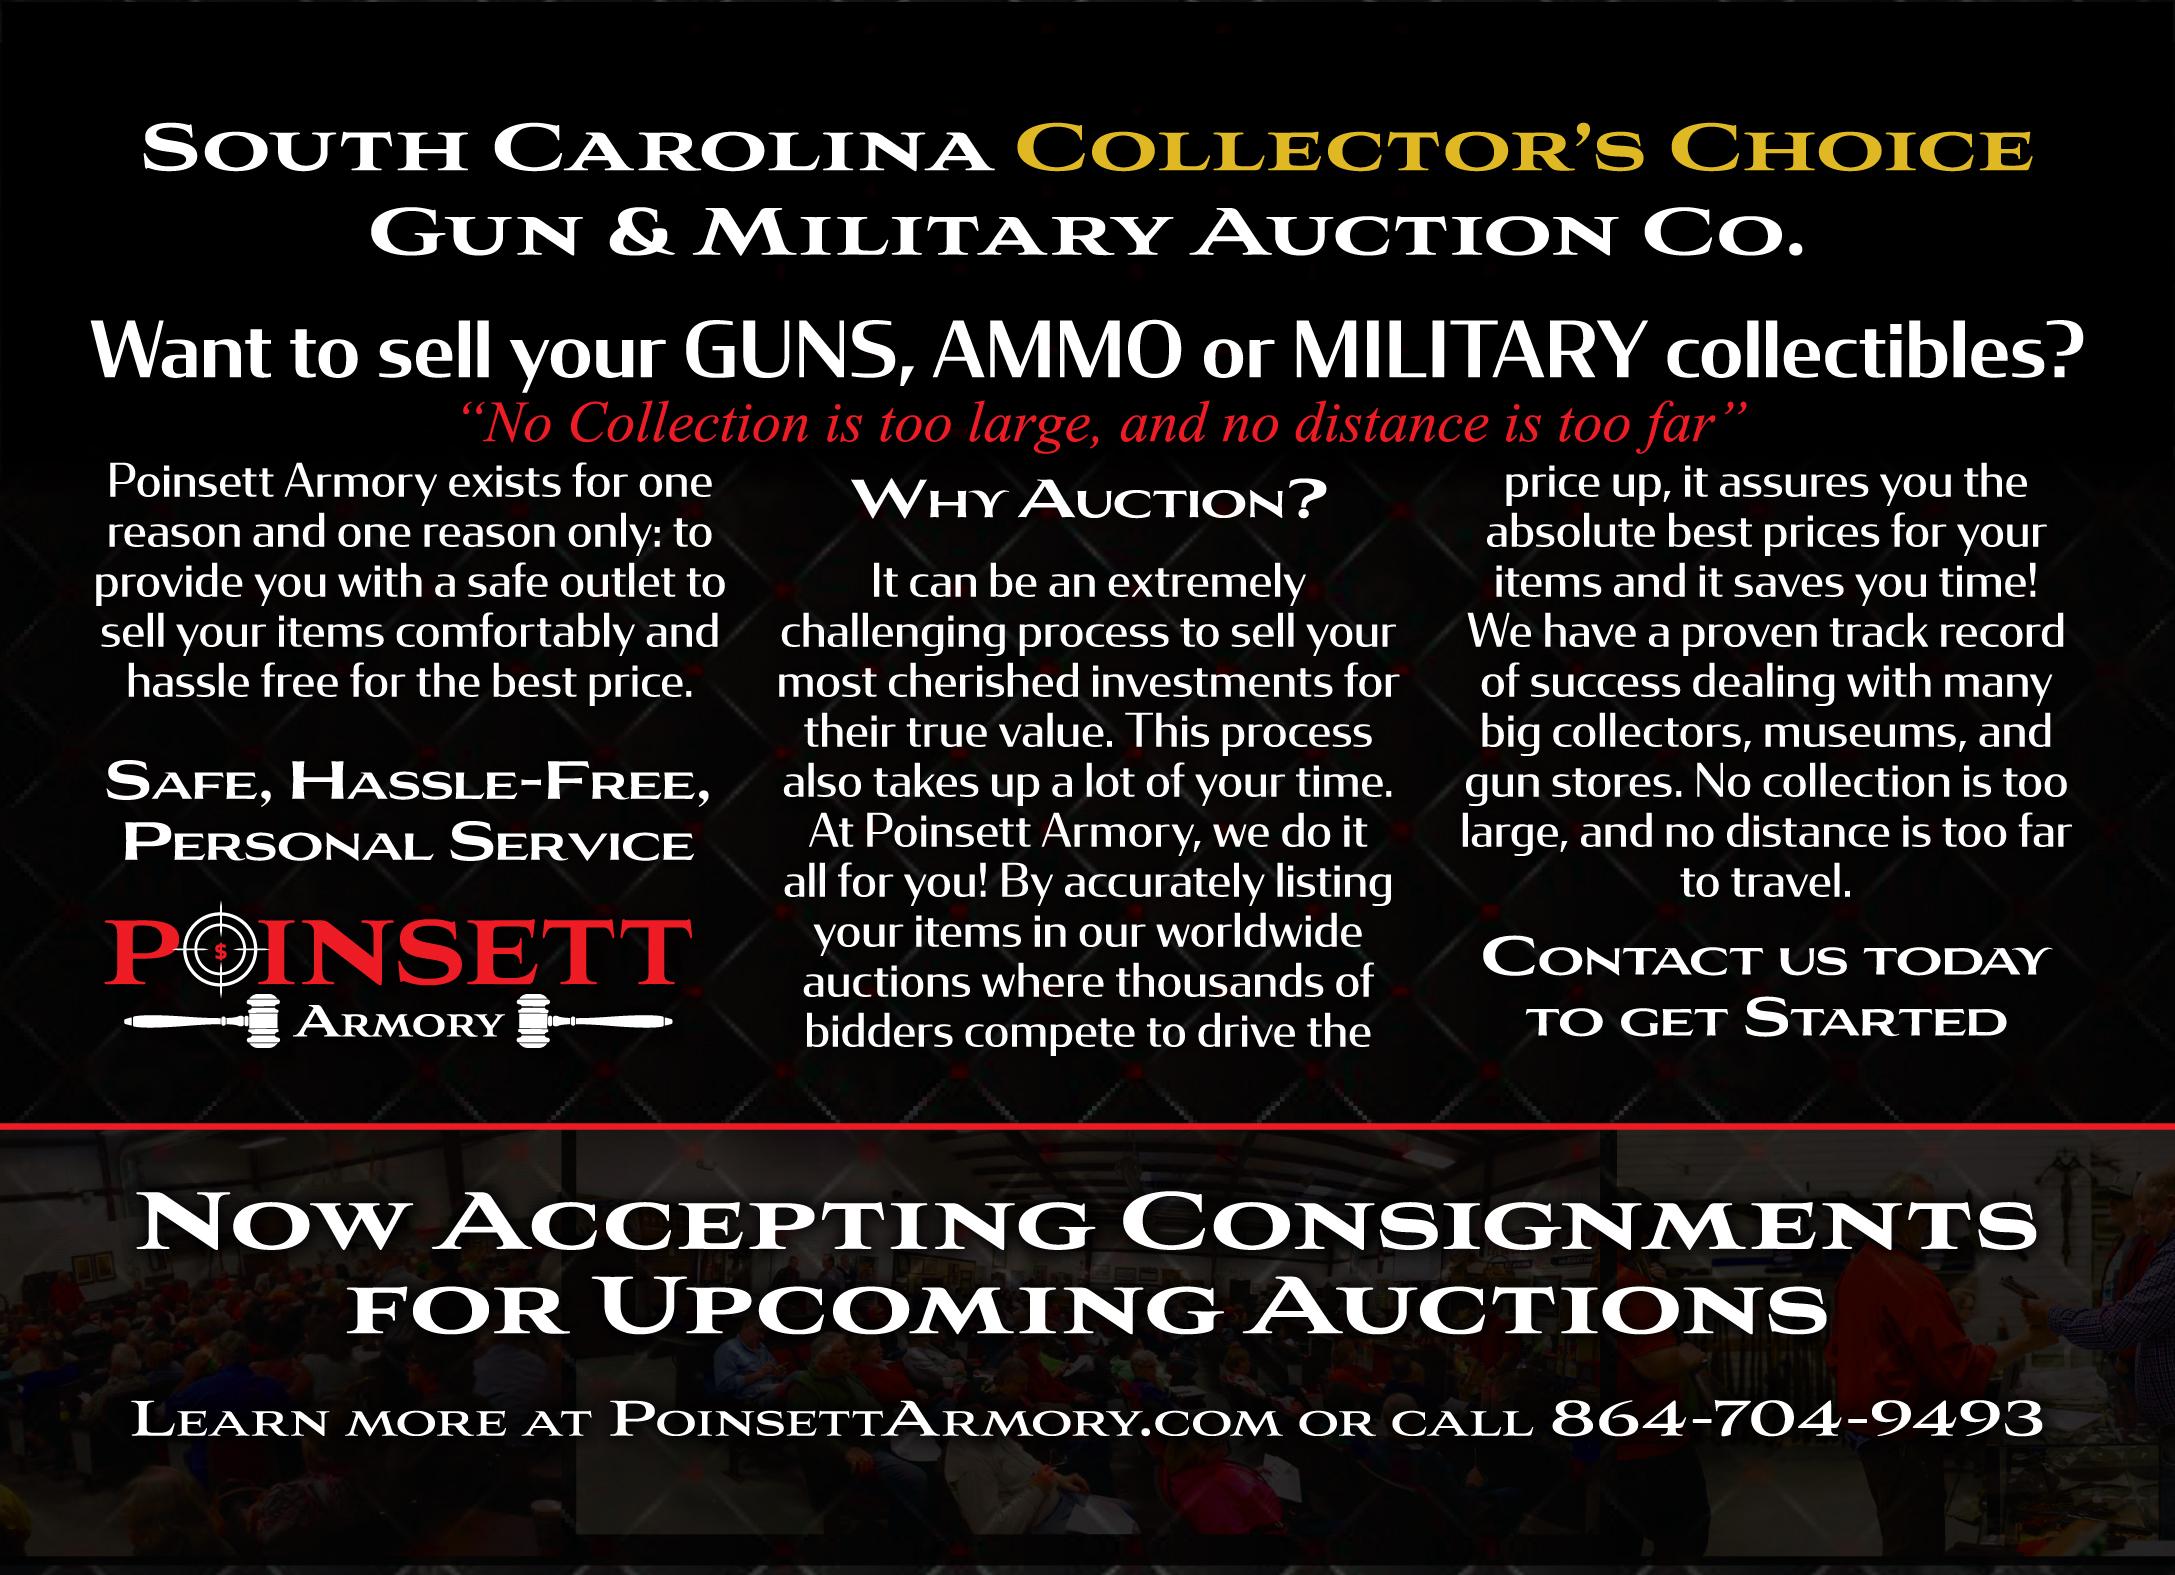 Accepting Consignments & Buying Collections - Quick and Simple w/ Great Commission Rates